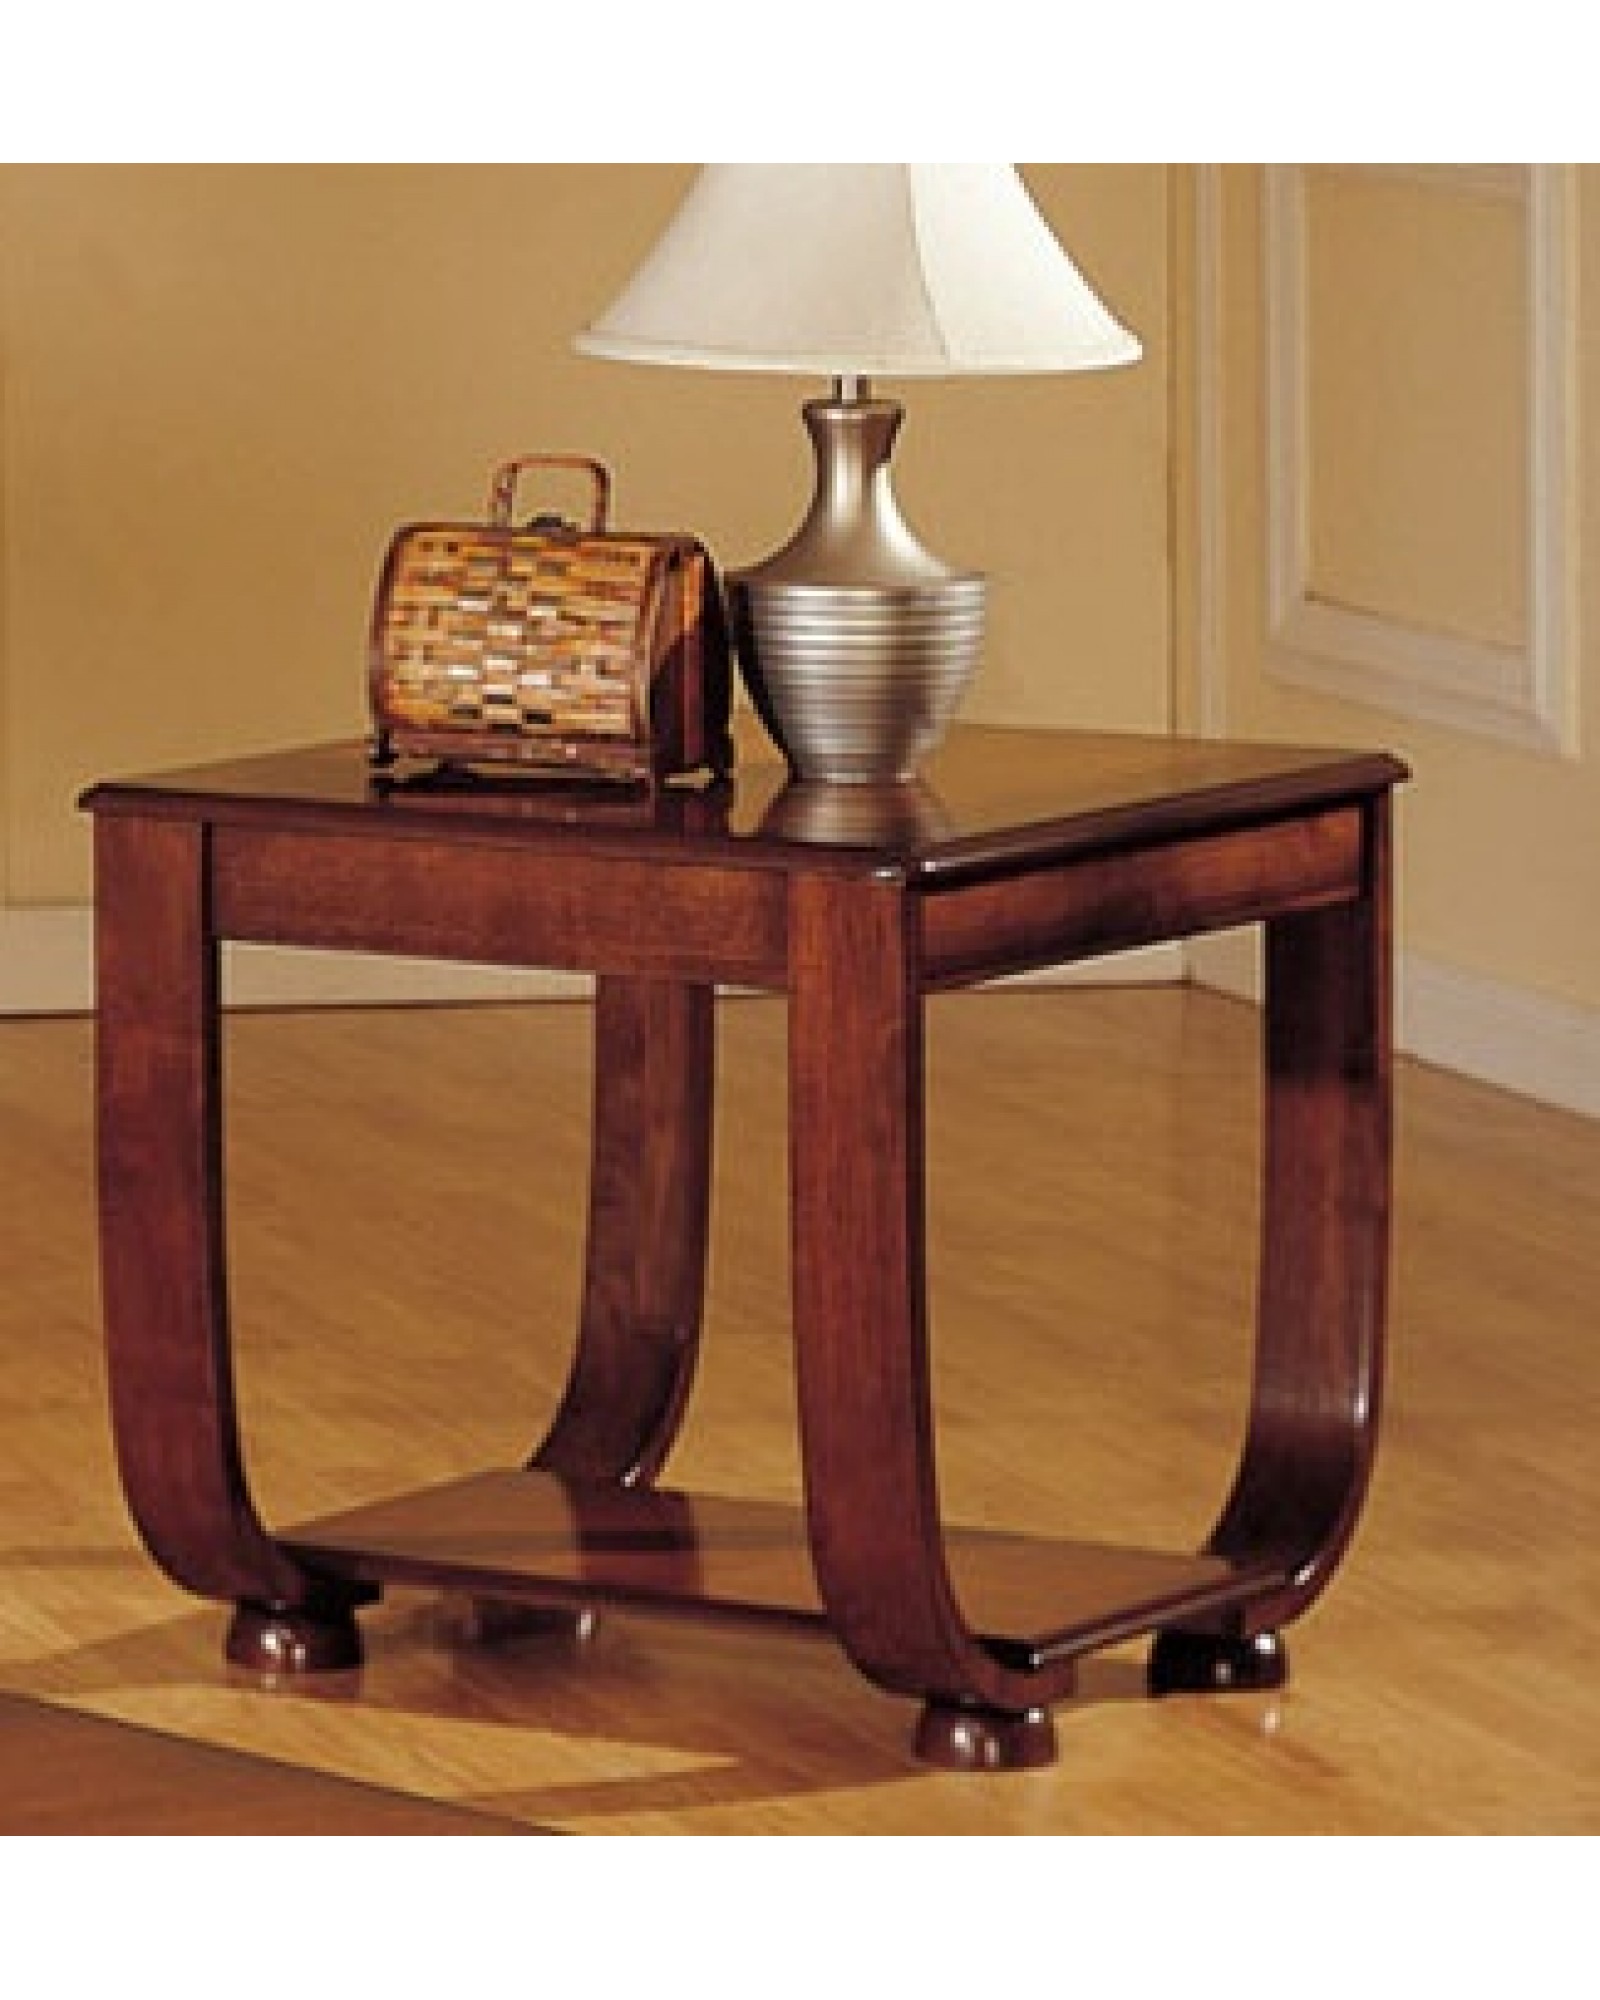 Coffee Table, Curved Legs, Matching End Table and Console